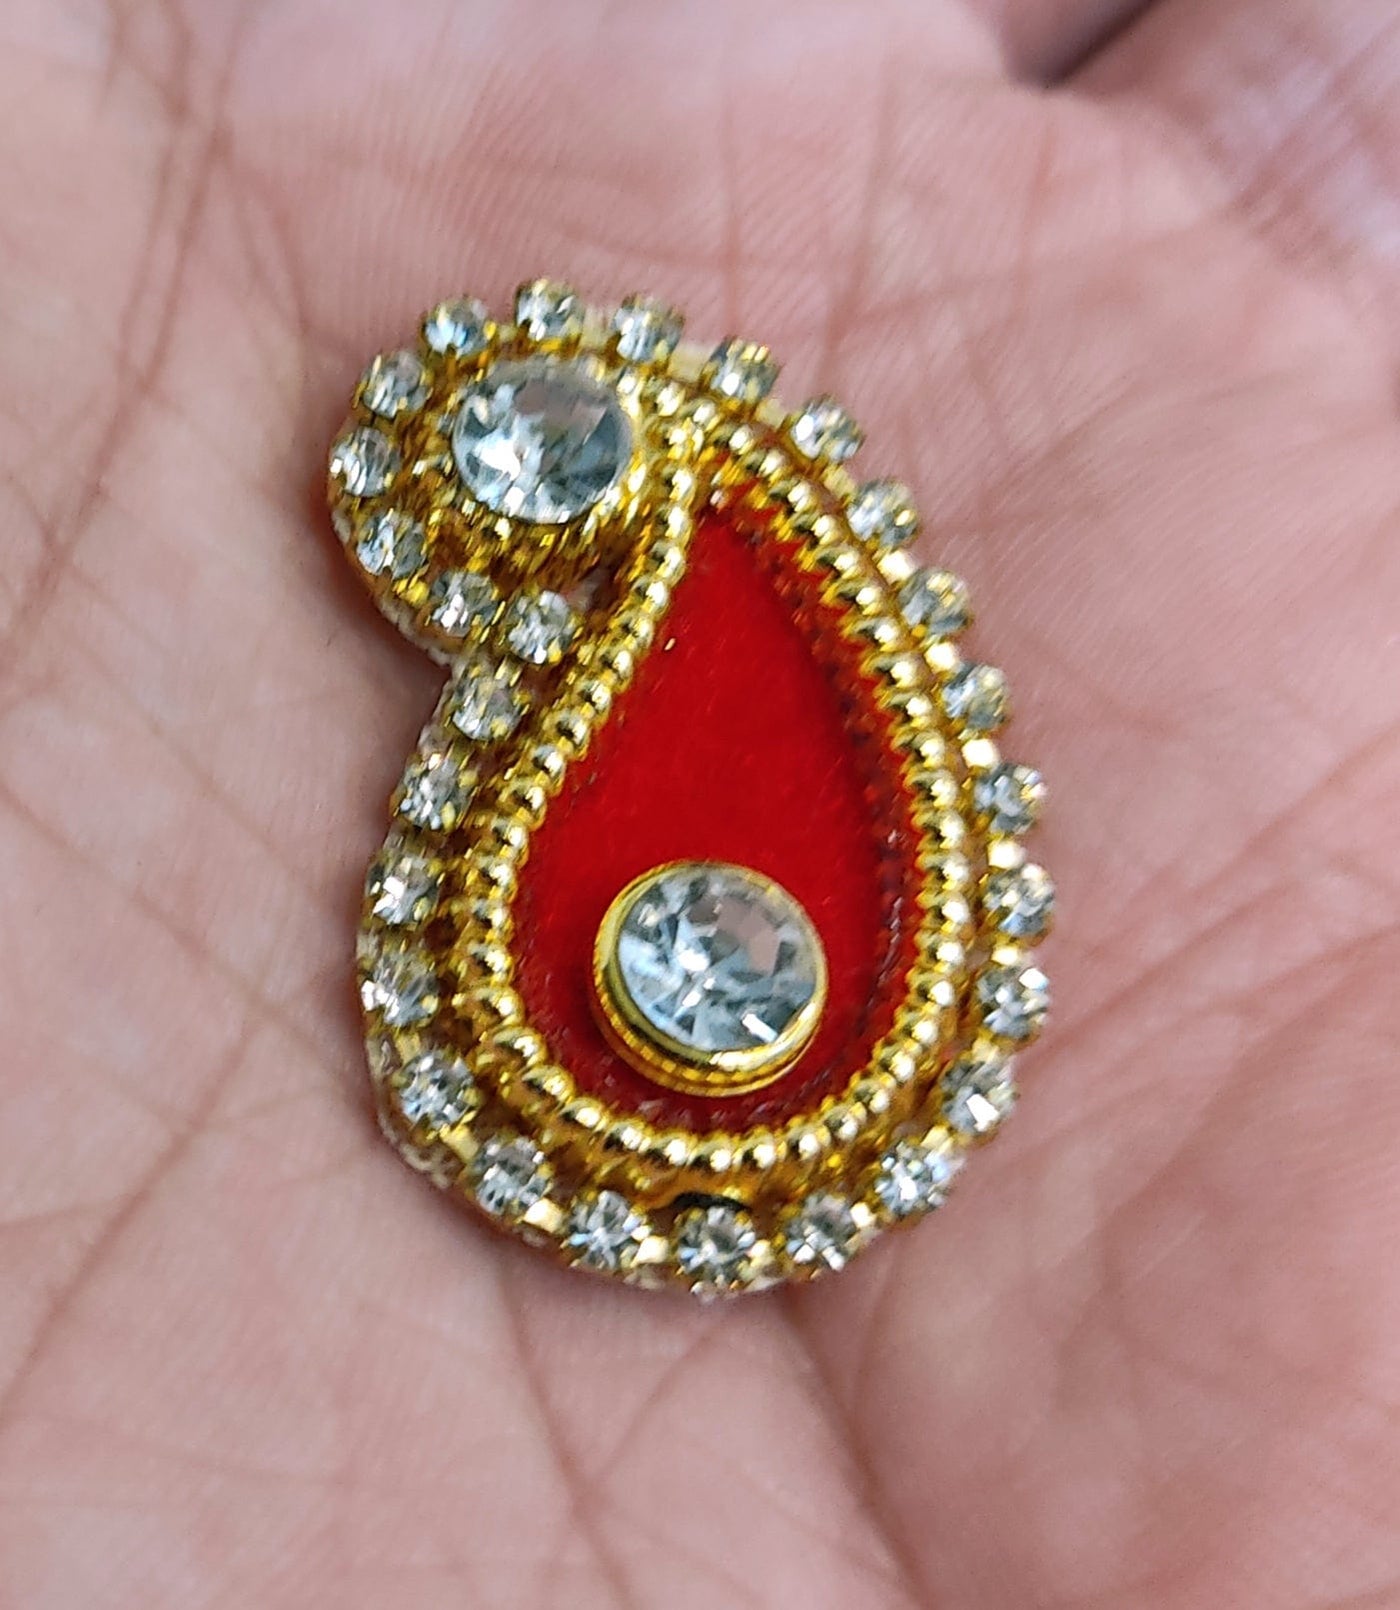 Lamansh Red Color Stone work Booti's for Various Art & Craft / Jewellery / Mala / Decorative / Festive season product making Raw material